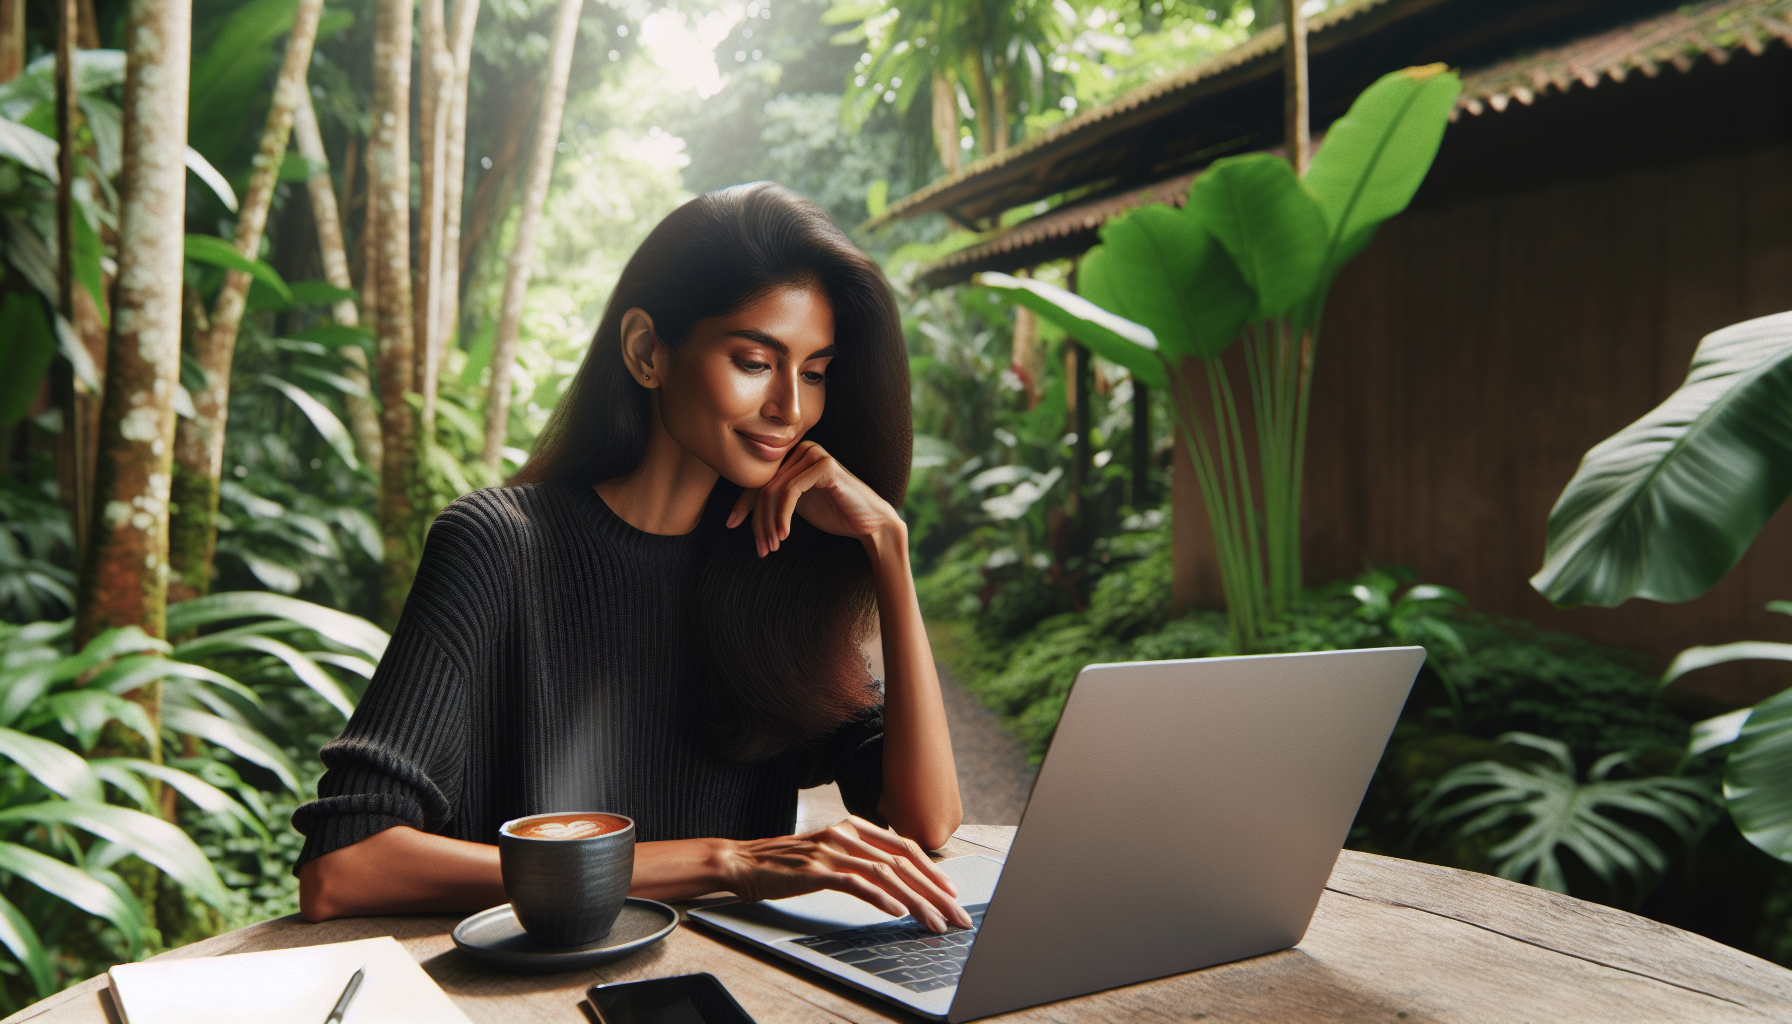 A person smiling and relaxed, taking a break from working on a laptop, with a lush green forest in the background and a cup of coffee steaming next to them.